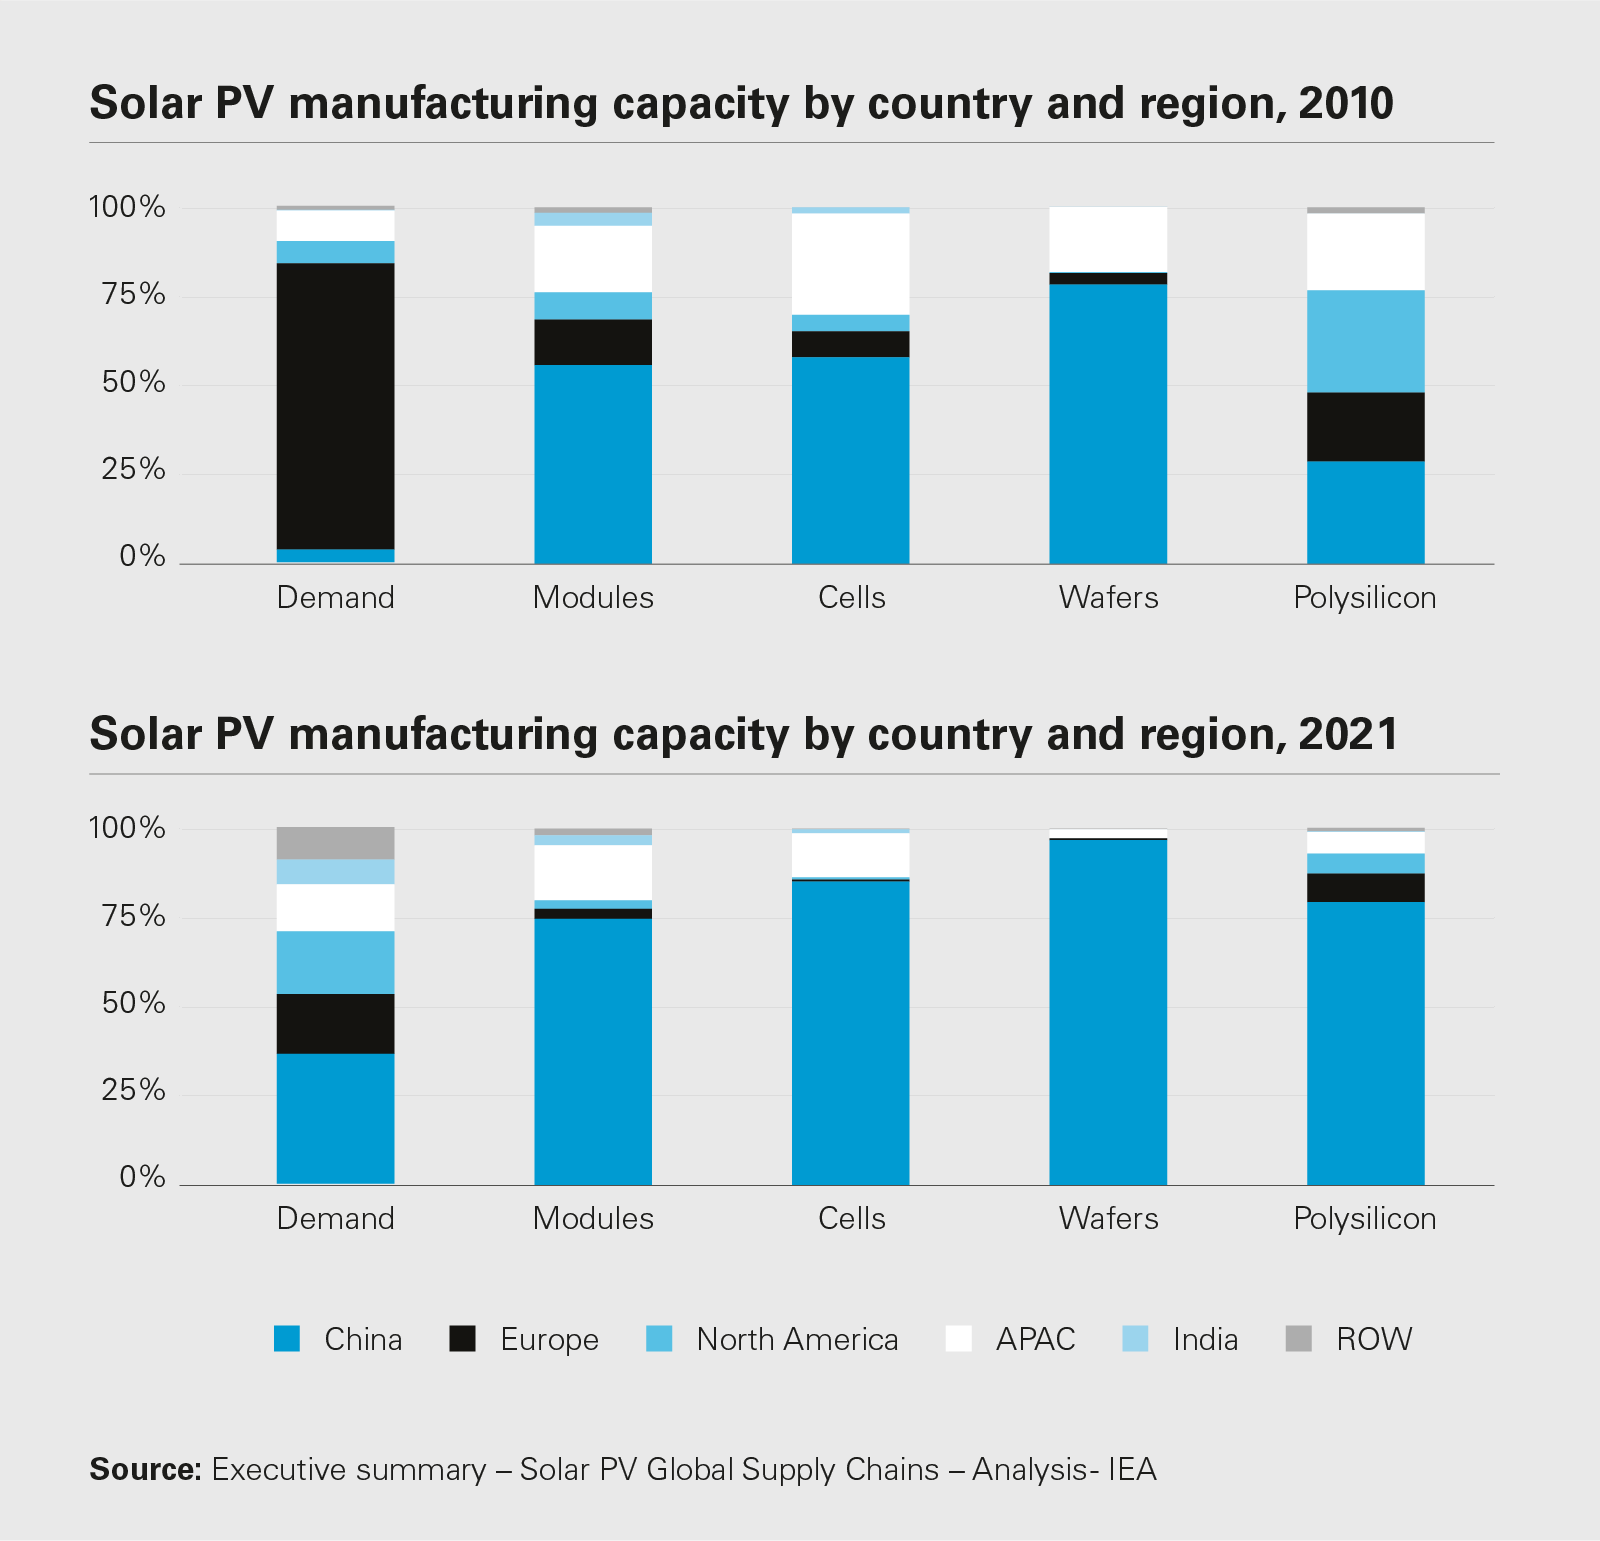 Solar PV manufacturing capacity by country and region, 2010